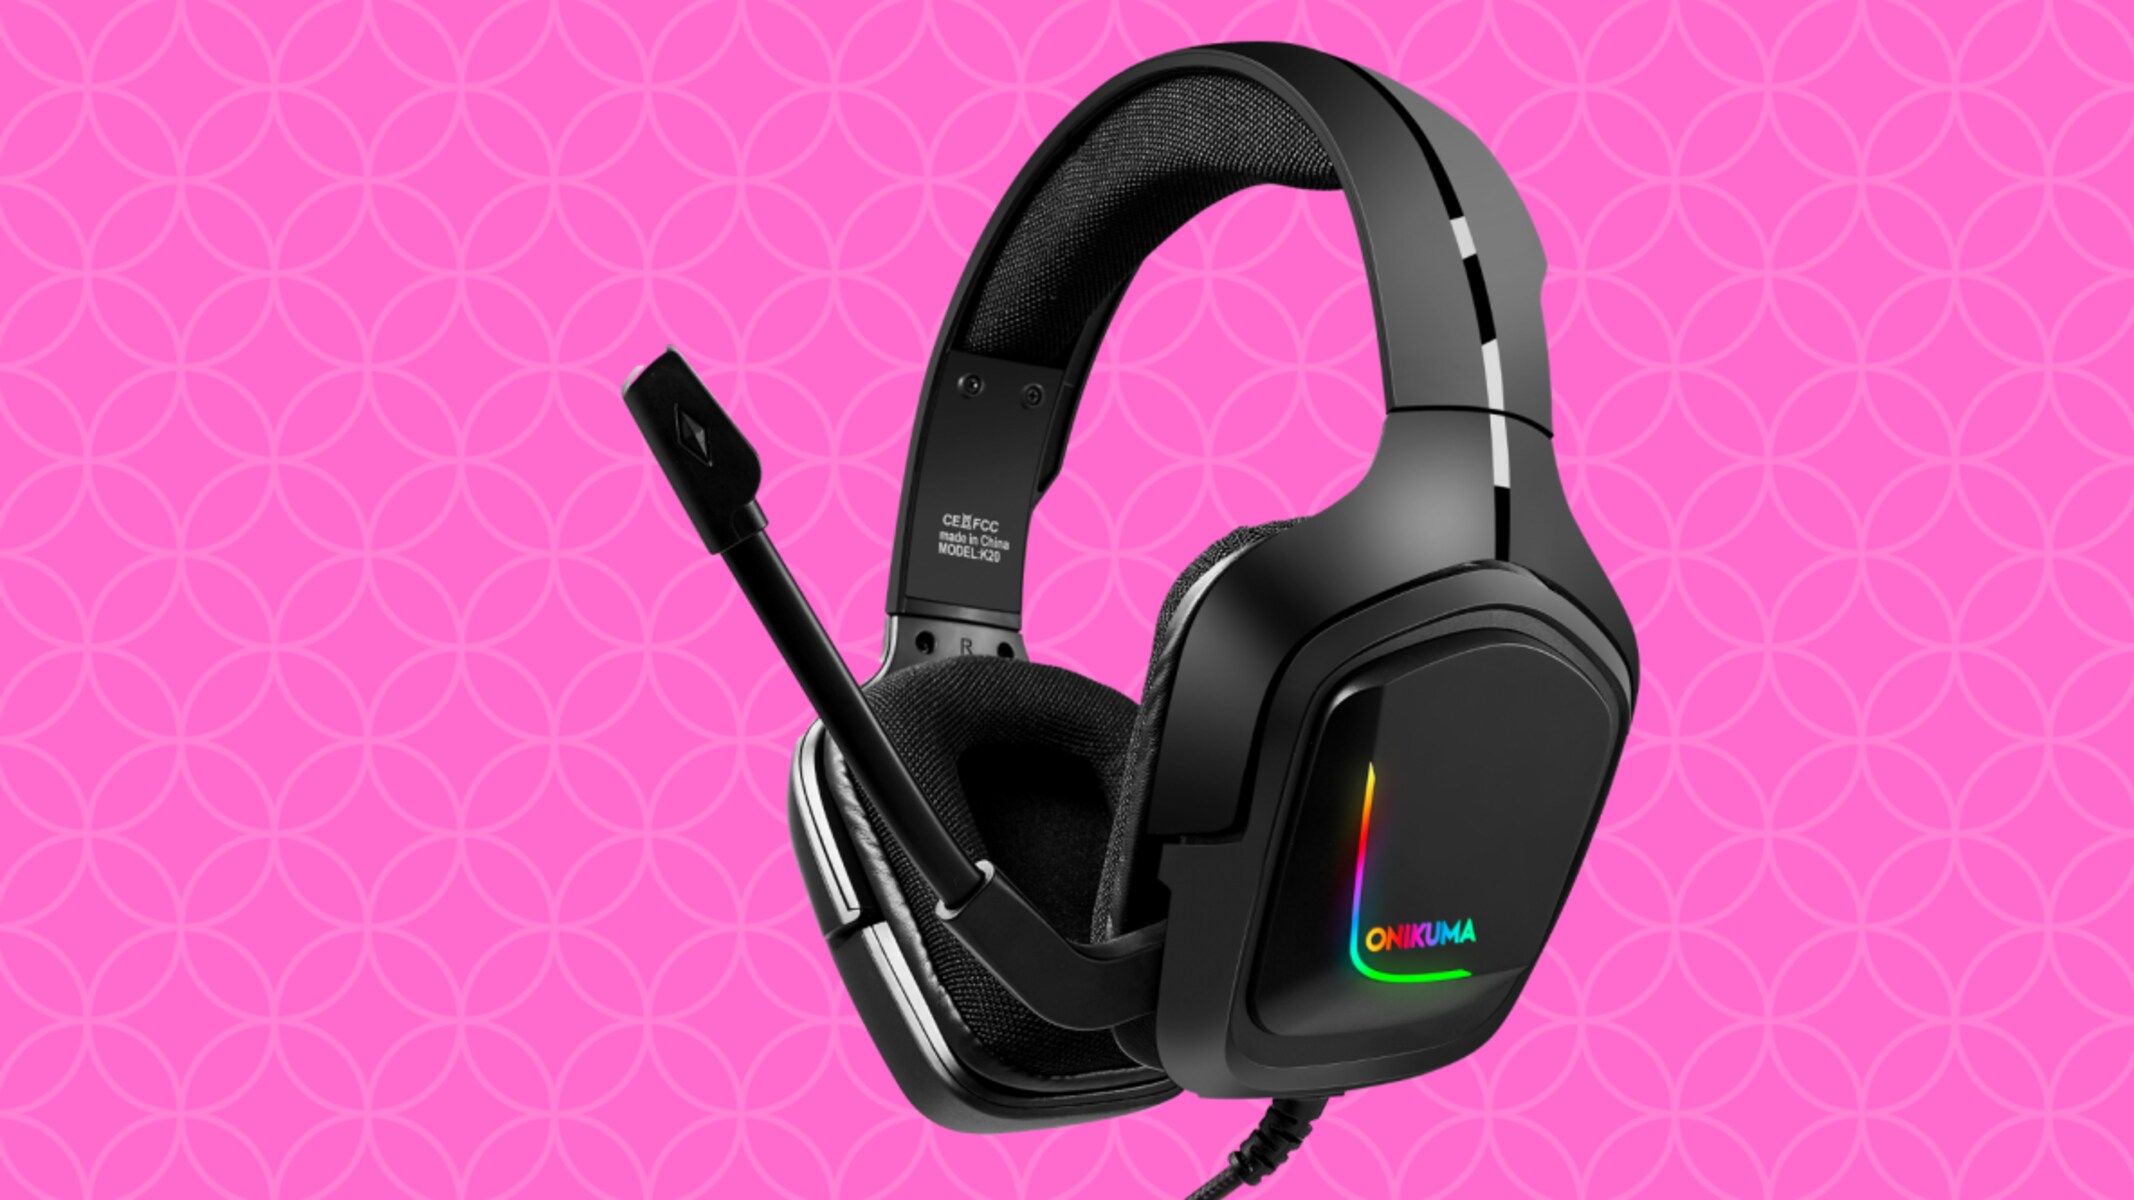 How To Use The Onikuma Gaming Headset